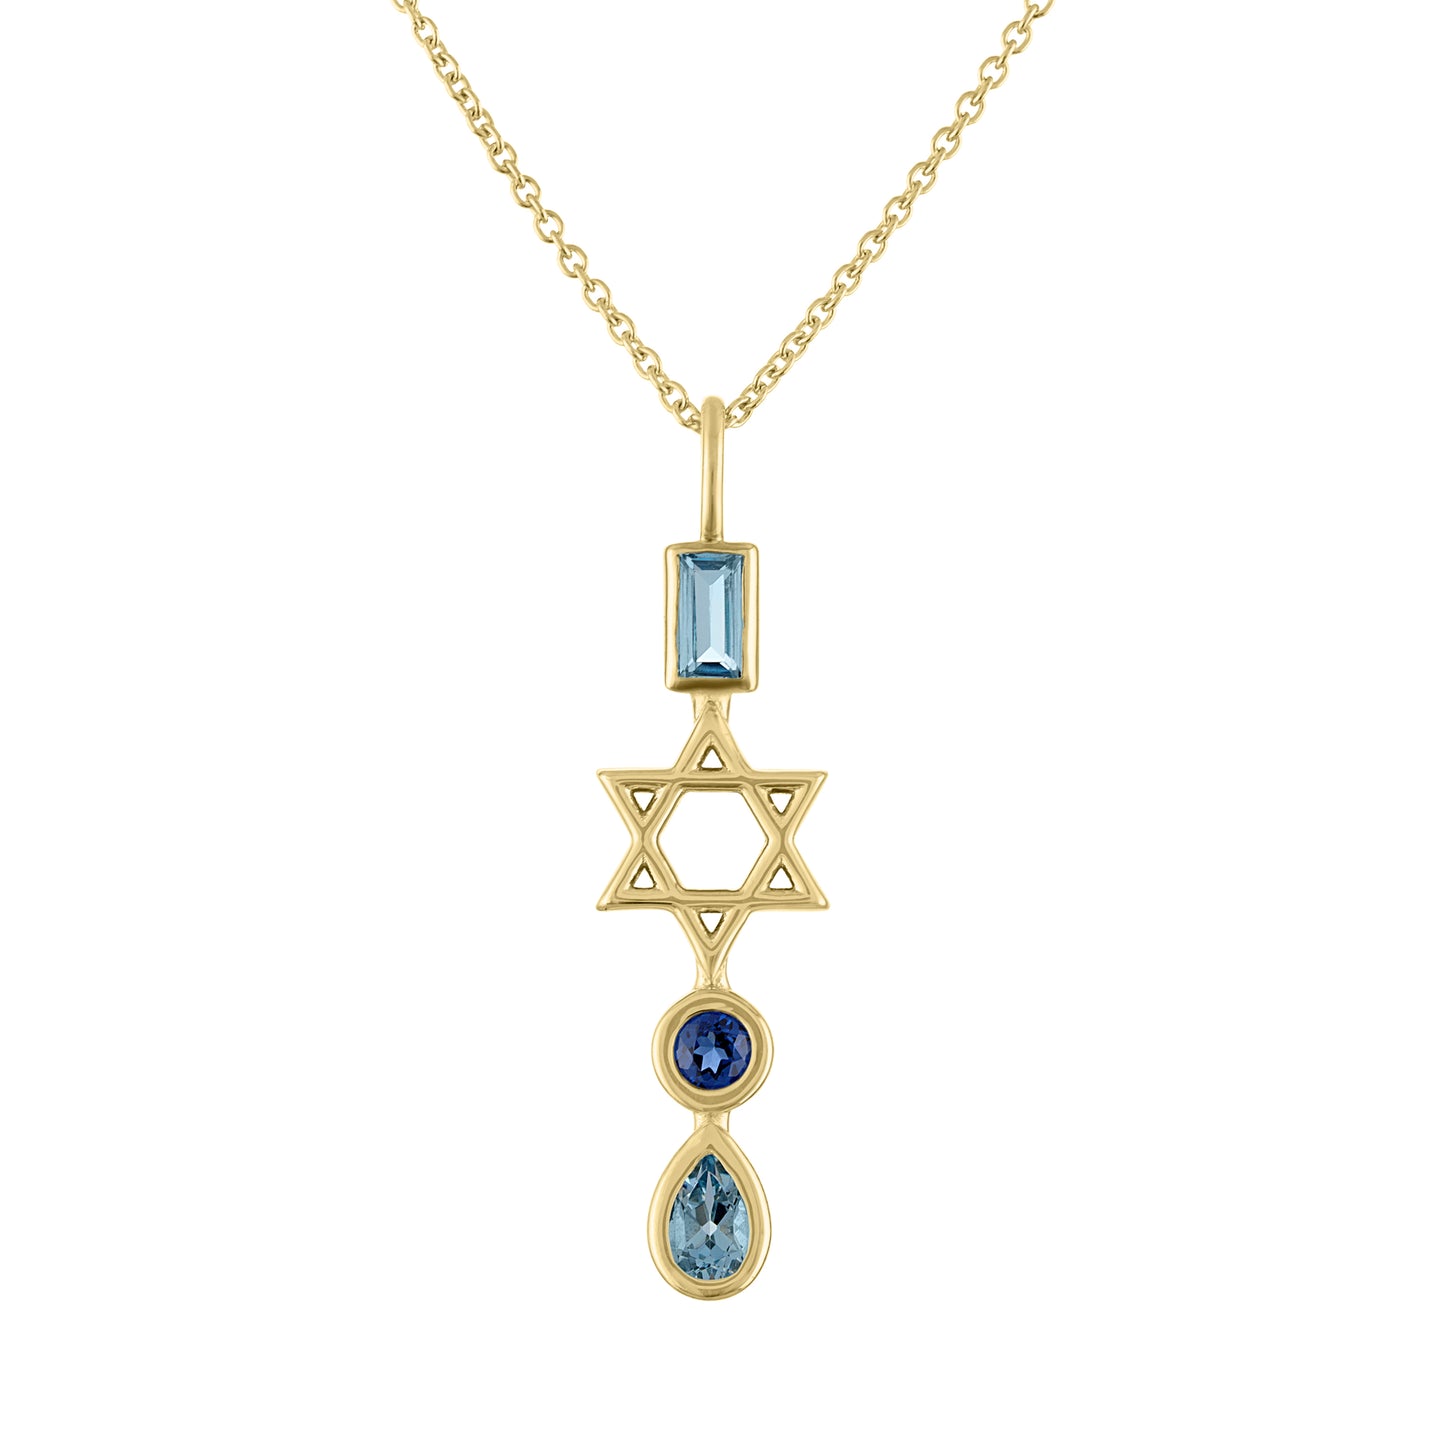 Bailey Star of David Charm Necklace